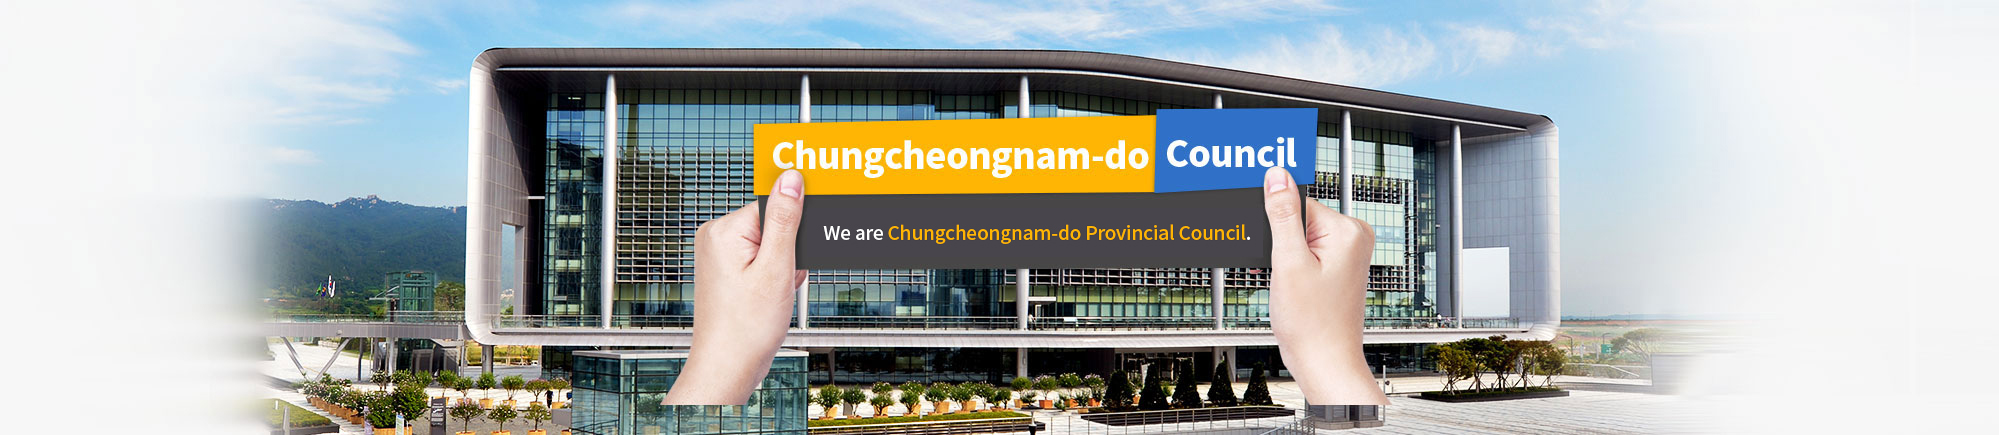 Chungcheongnam-do Council The Council of hope and moving for the future! Chungcheongnam-do council is making it!